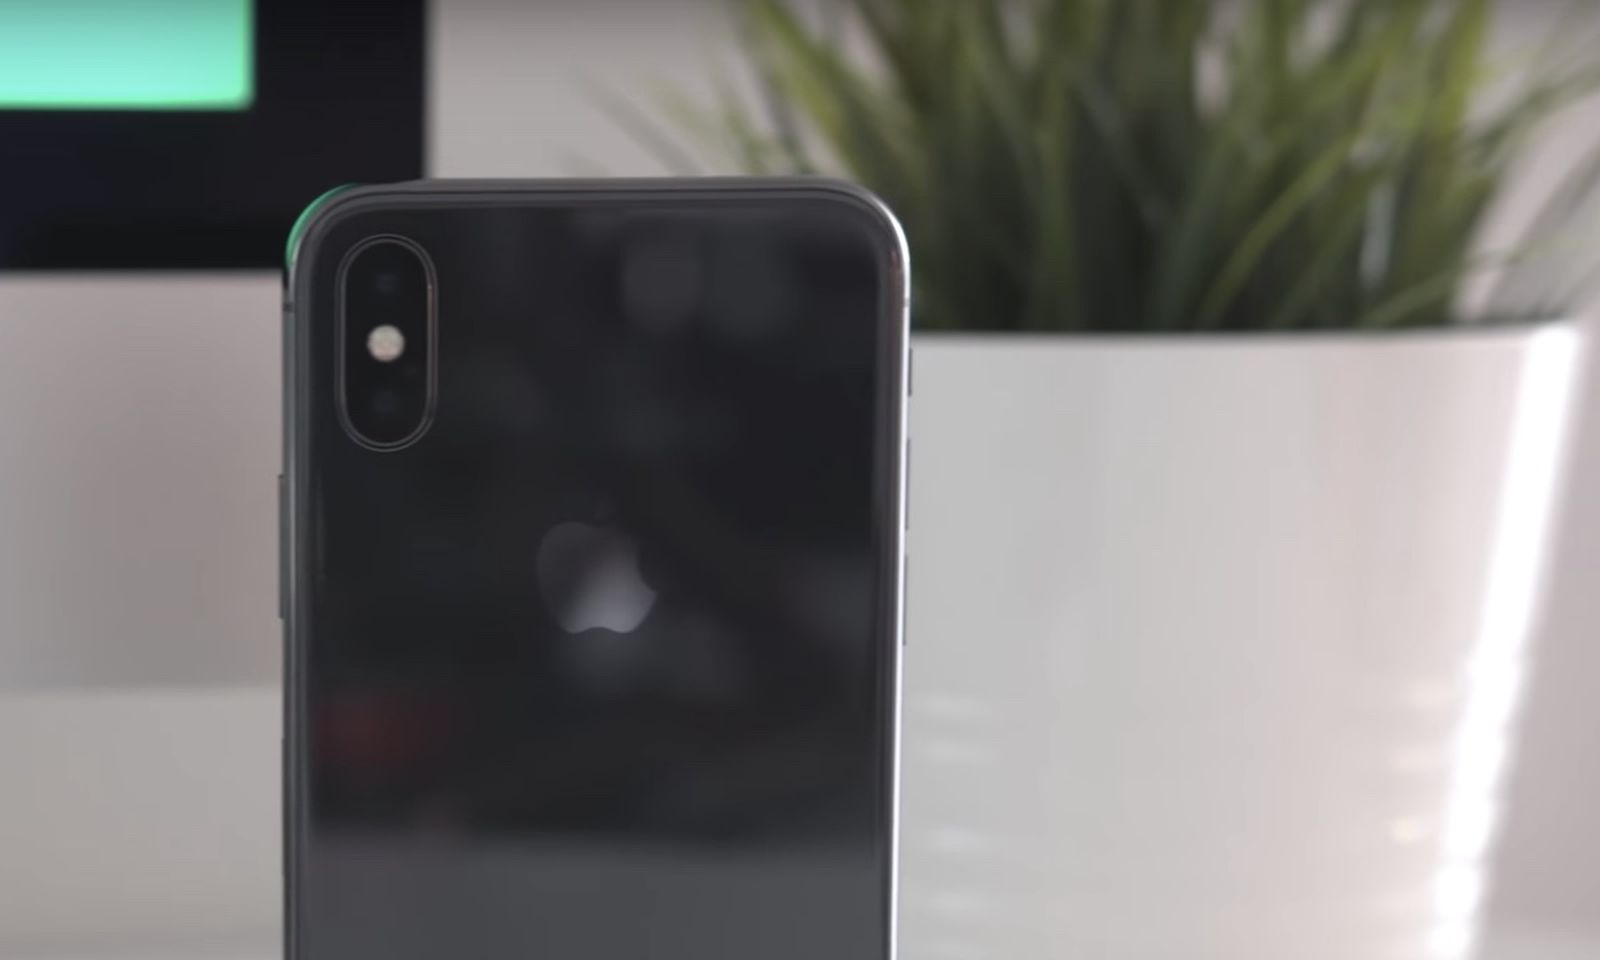 iOS 14.4 will display warning on iPhones with non-original cameras